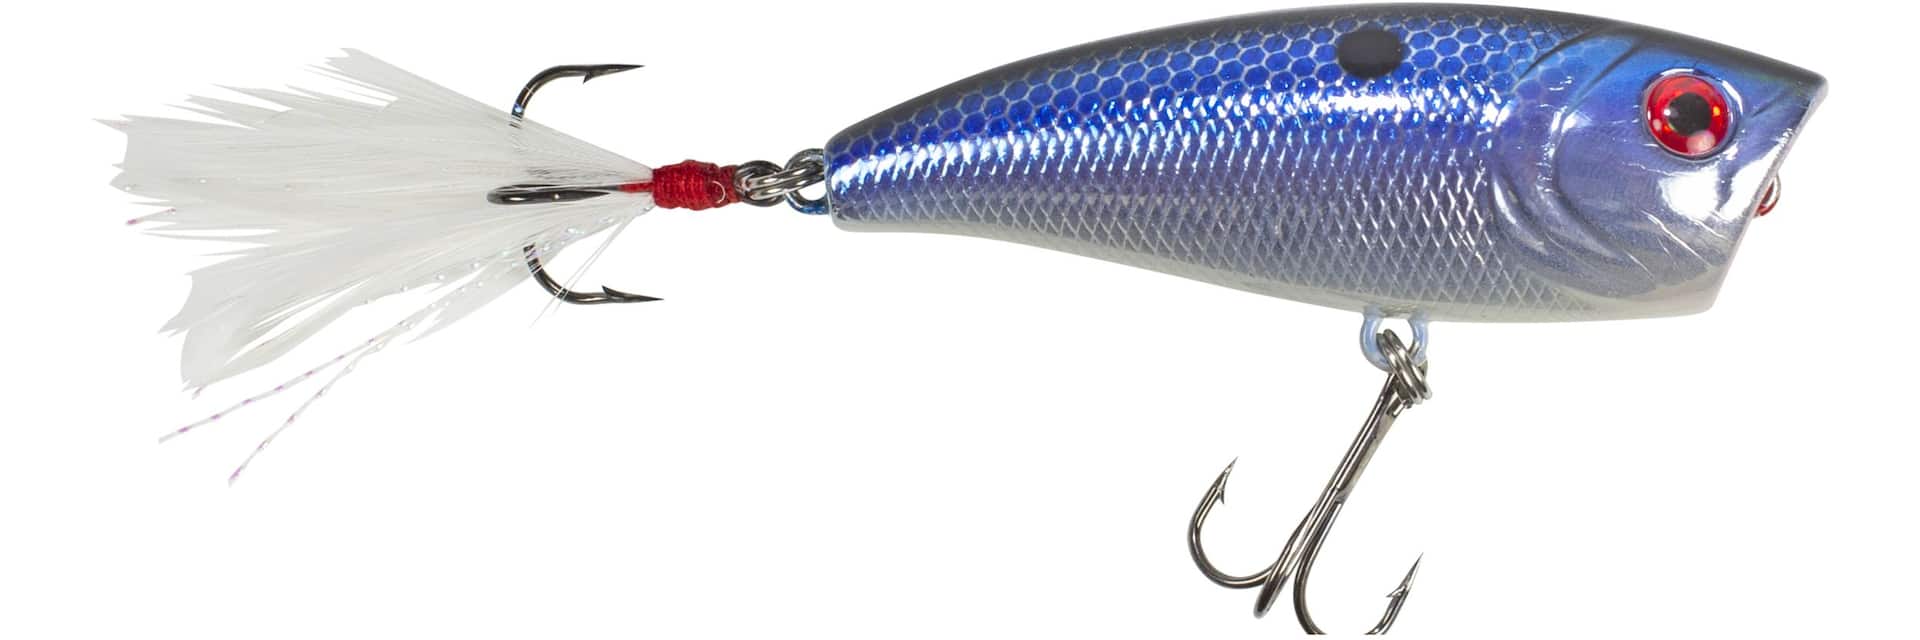 https://media-www.canadiantire.ca/product/playing/fishing/fishing-lures/0771253/xcalibur-xtr-popper-silver-blue-7-16-oz-b1039f9e-8119-4934-aaaa-1fe0bf6a940f-jpgrendition.jpg